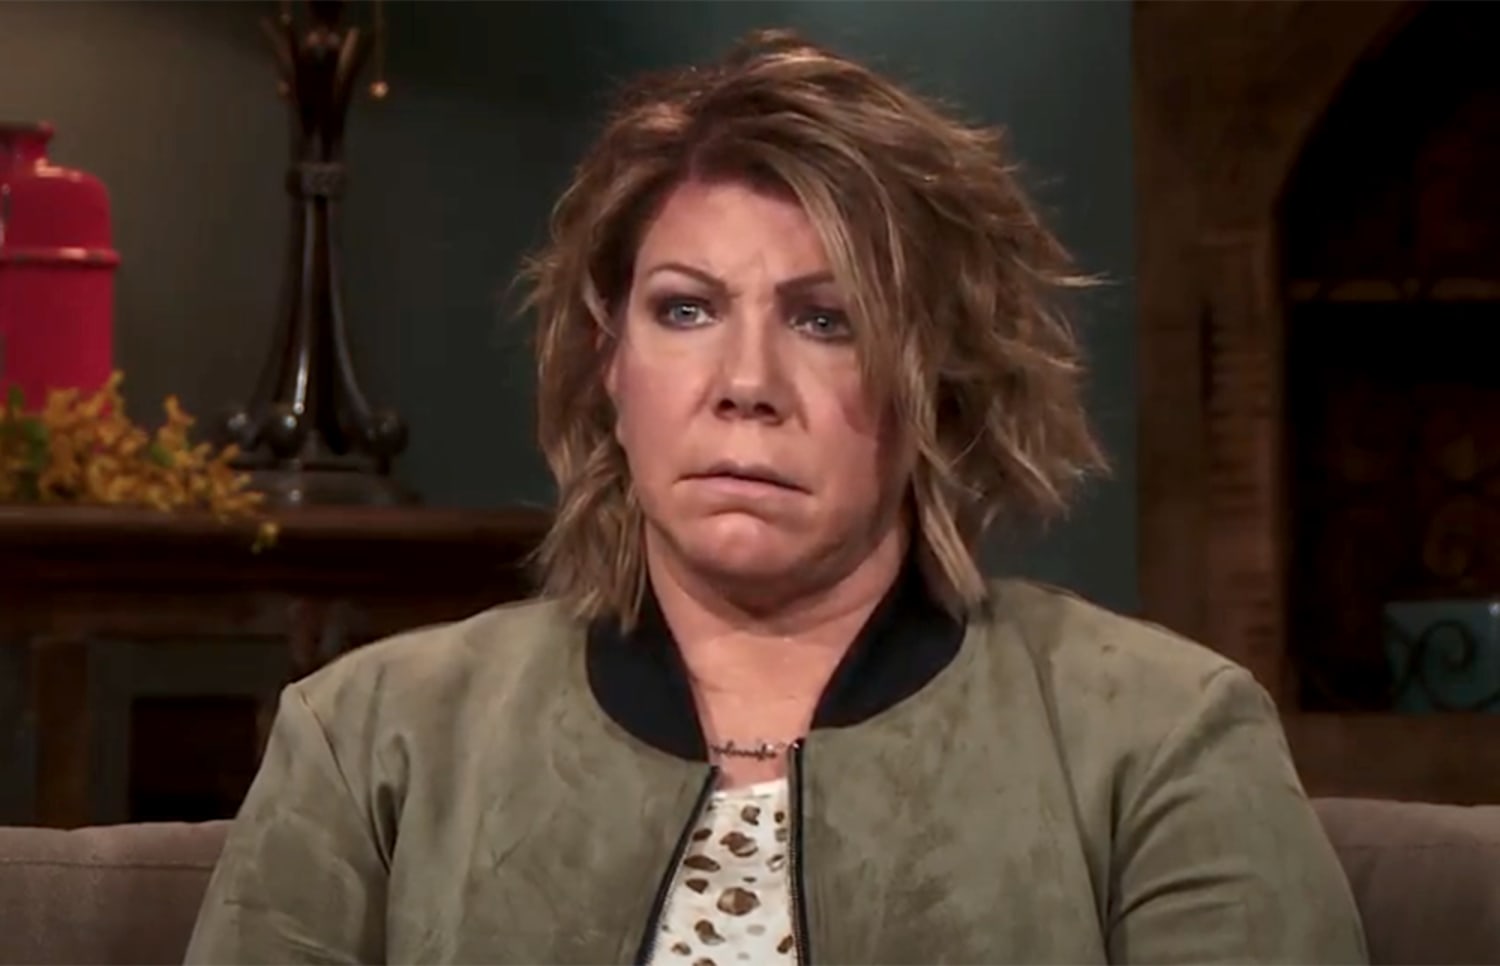 Sister Wives' Star Meri Brown 'Wants To Work On' Marriage To Kody